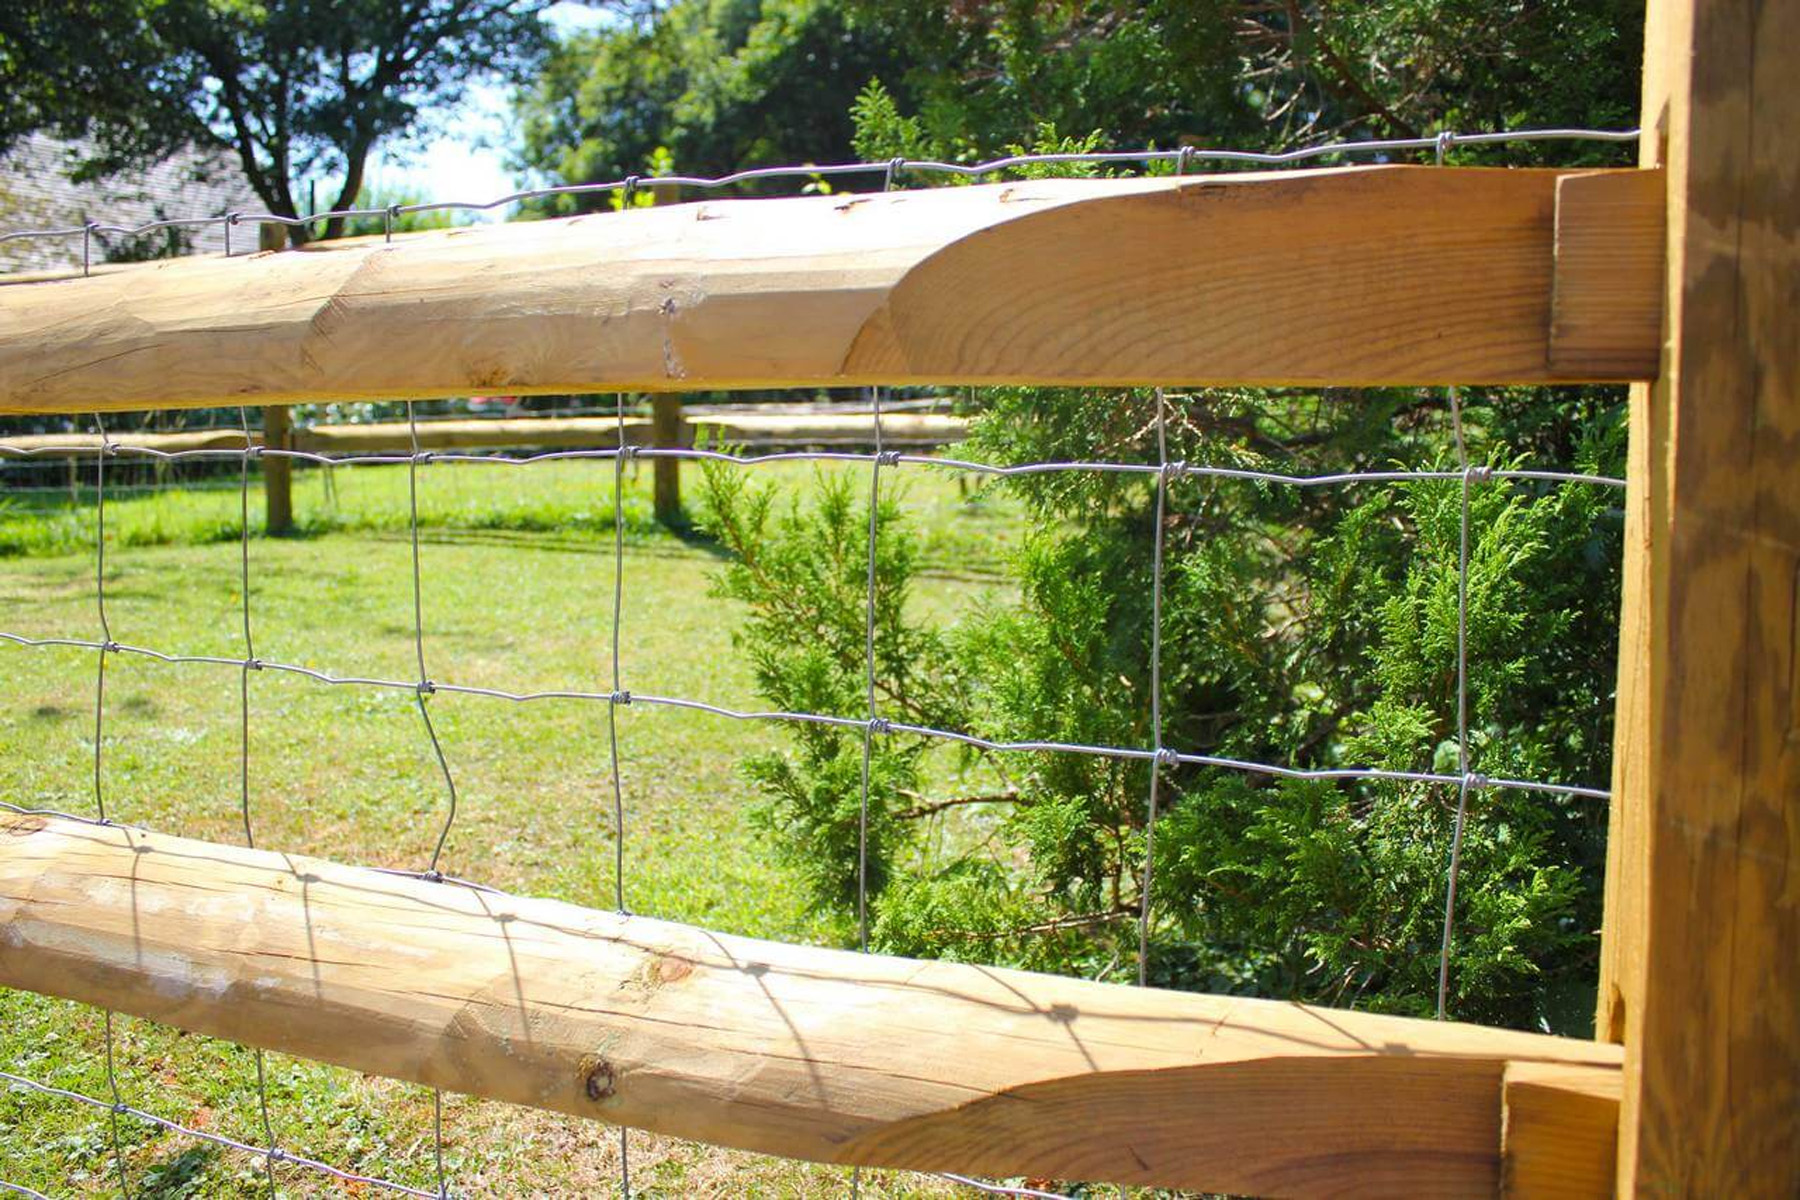 wood fence without mold, mildew orgreen algae growth